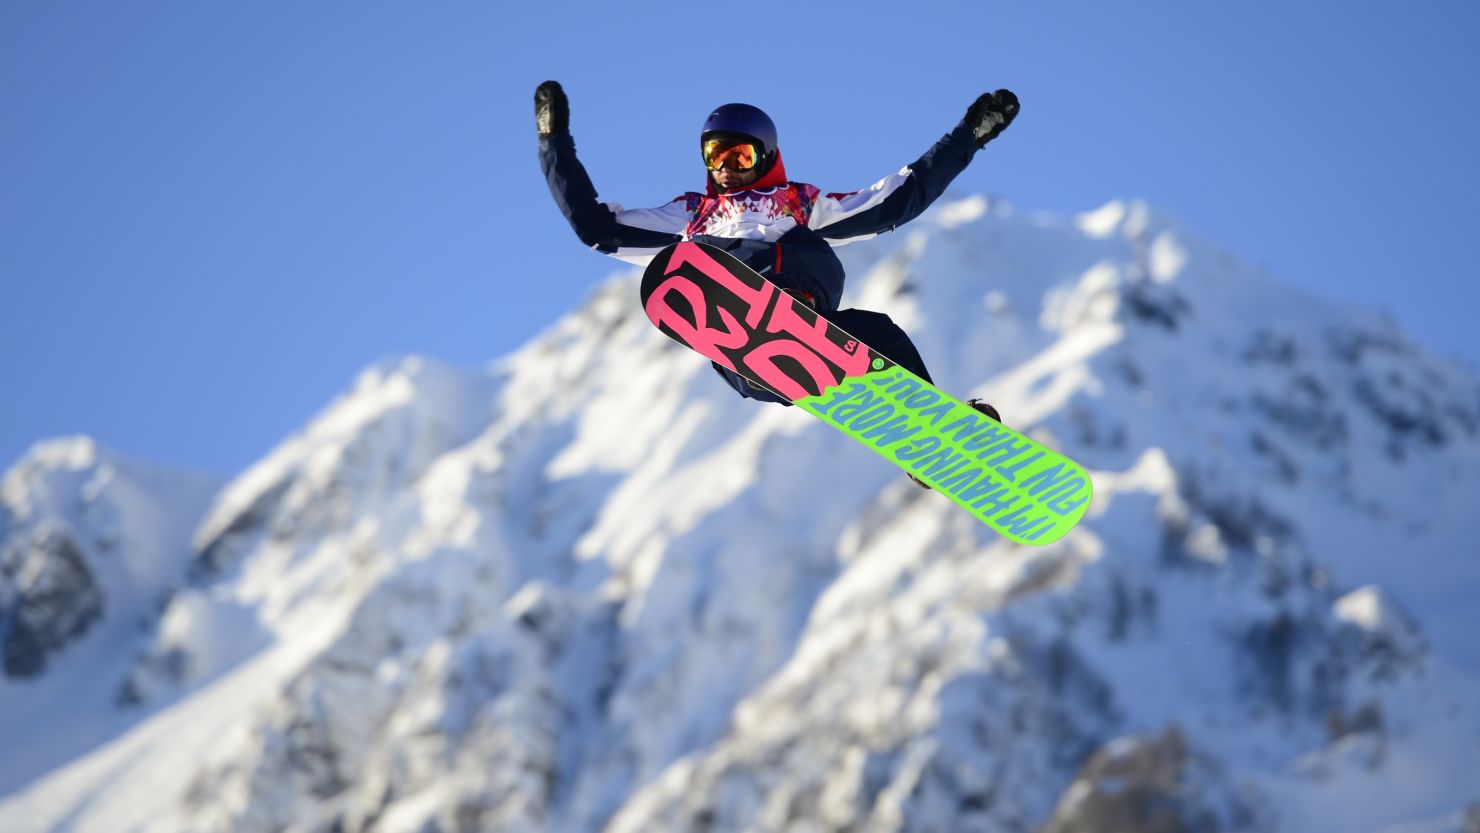 British snowboarder Billy Morgan flies high as the first athlete to compete in the 2014 Winter Olympics.